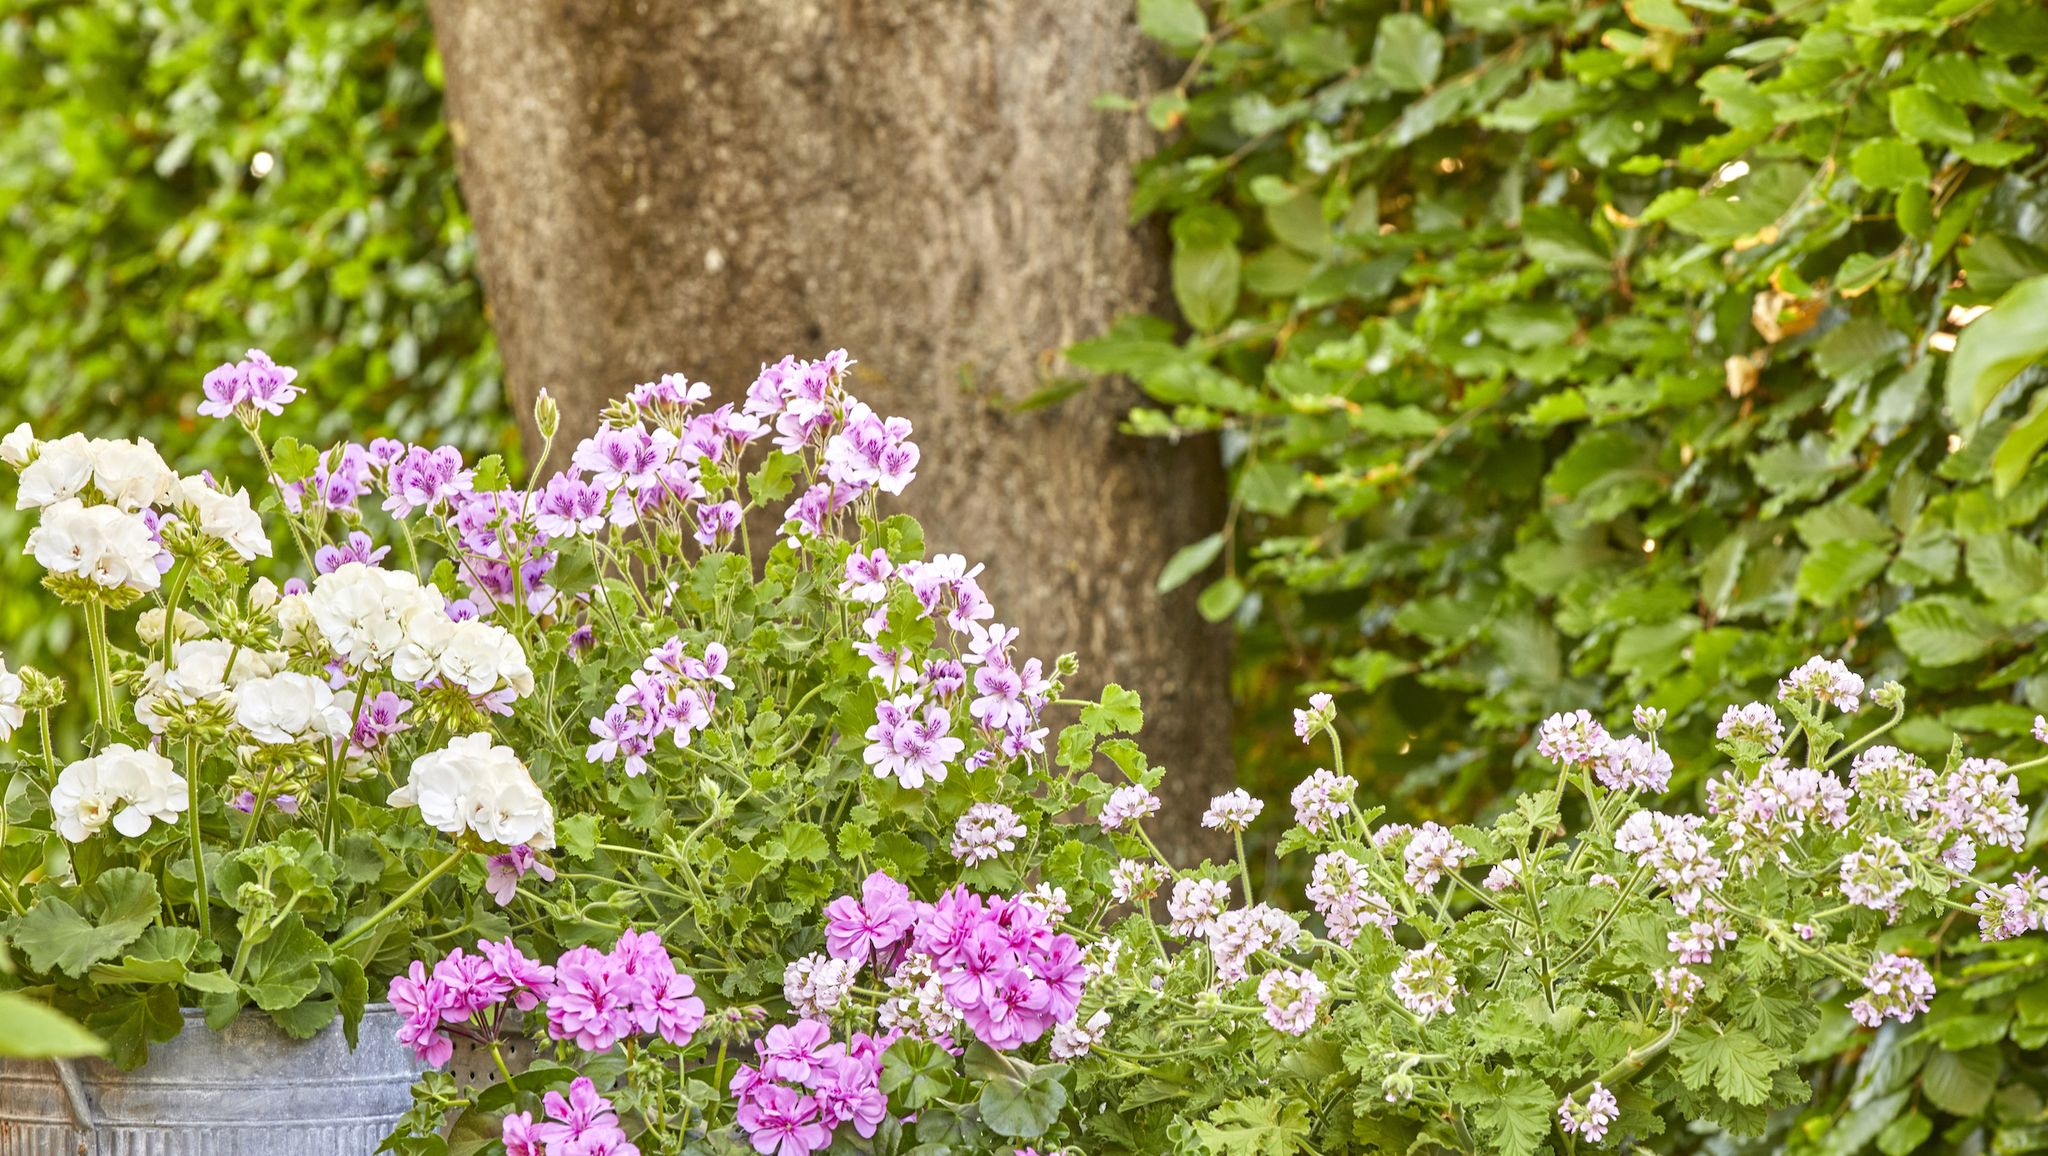 The Complete Guide to Growing Perennials in Containers